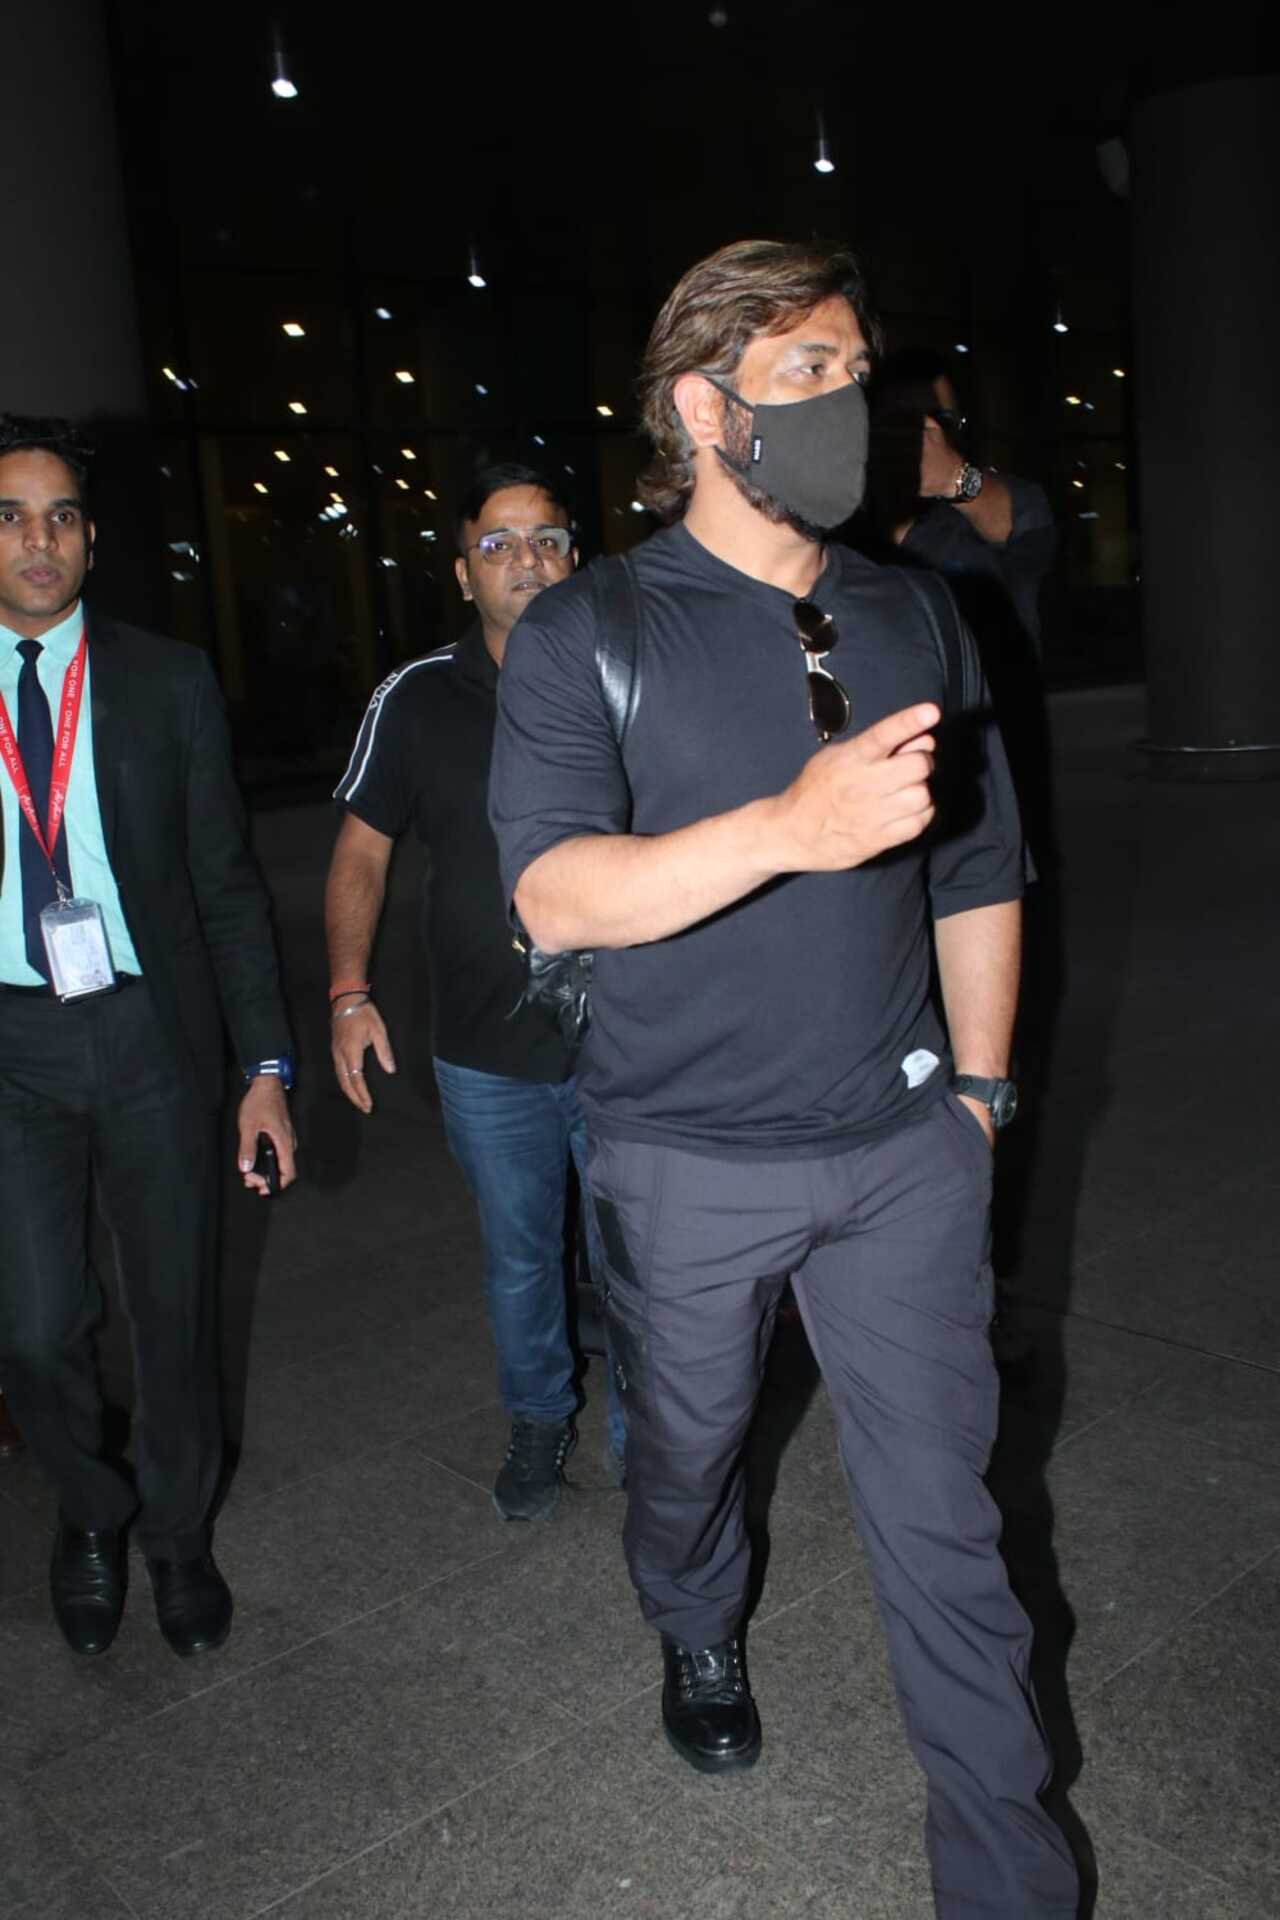 Captain cool MS Dhoni was spotted at the airport